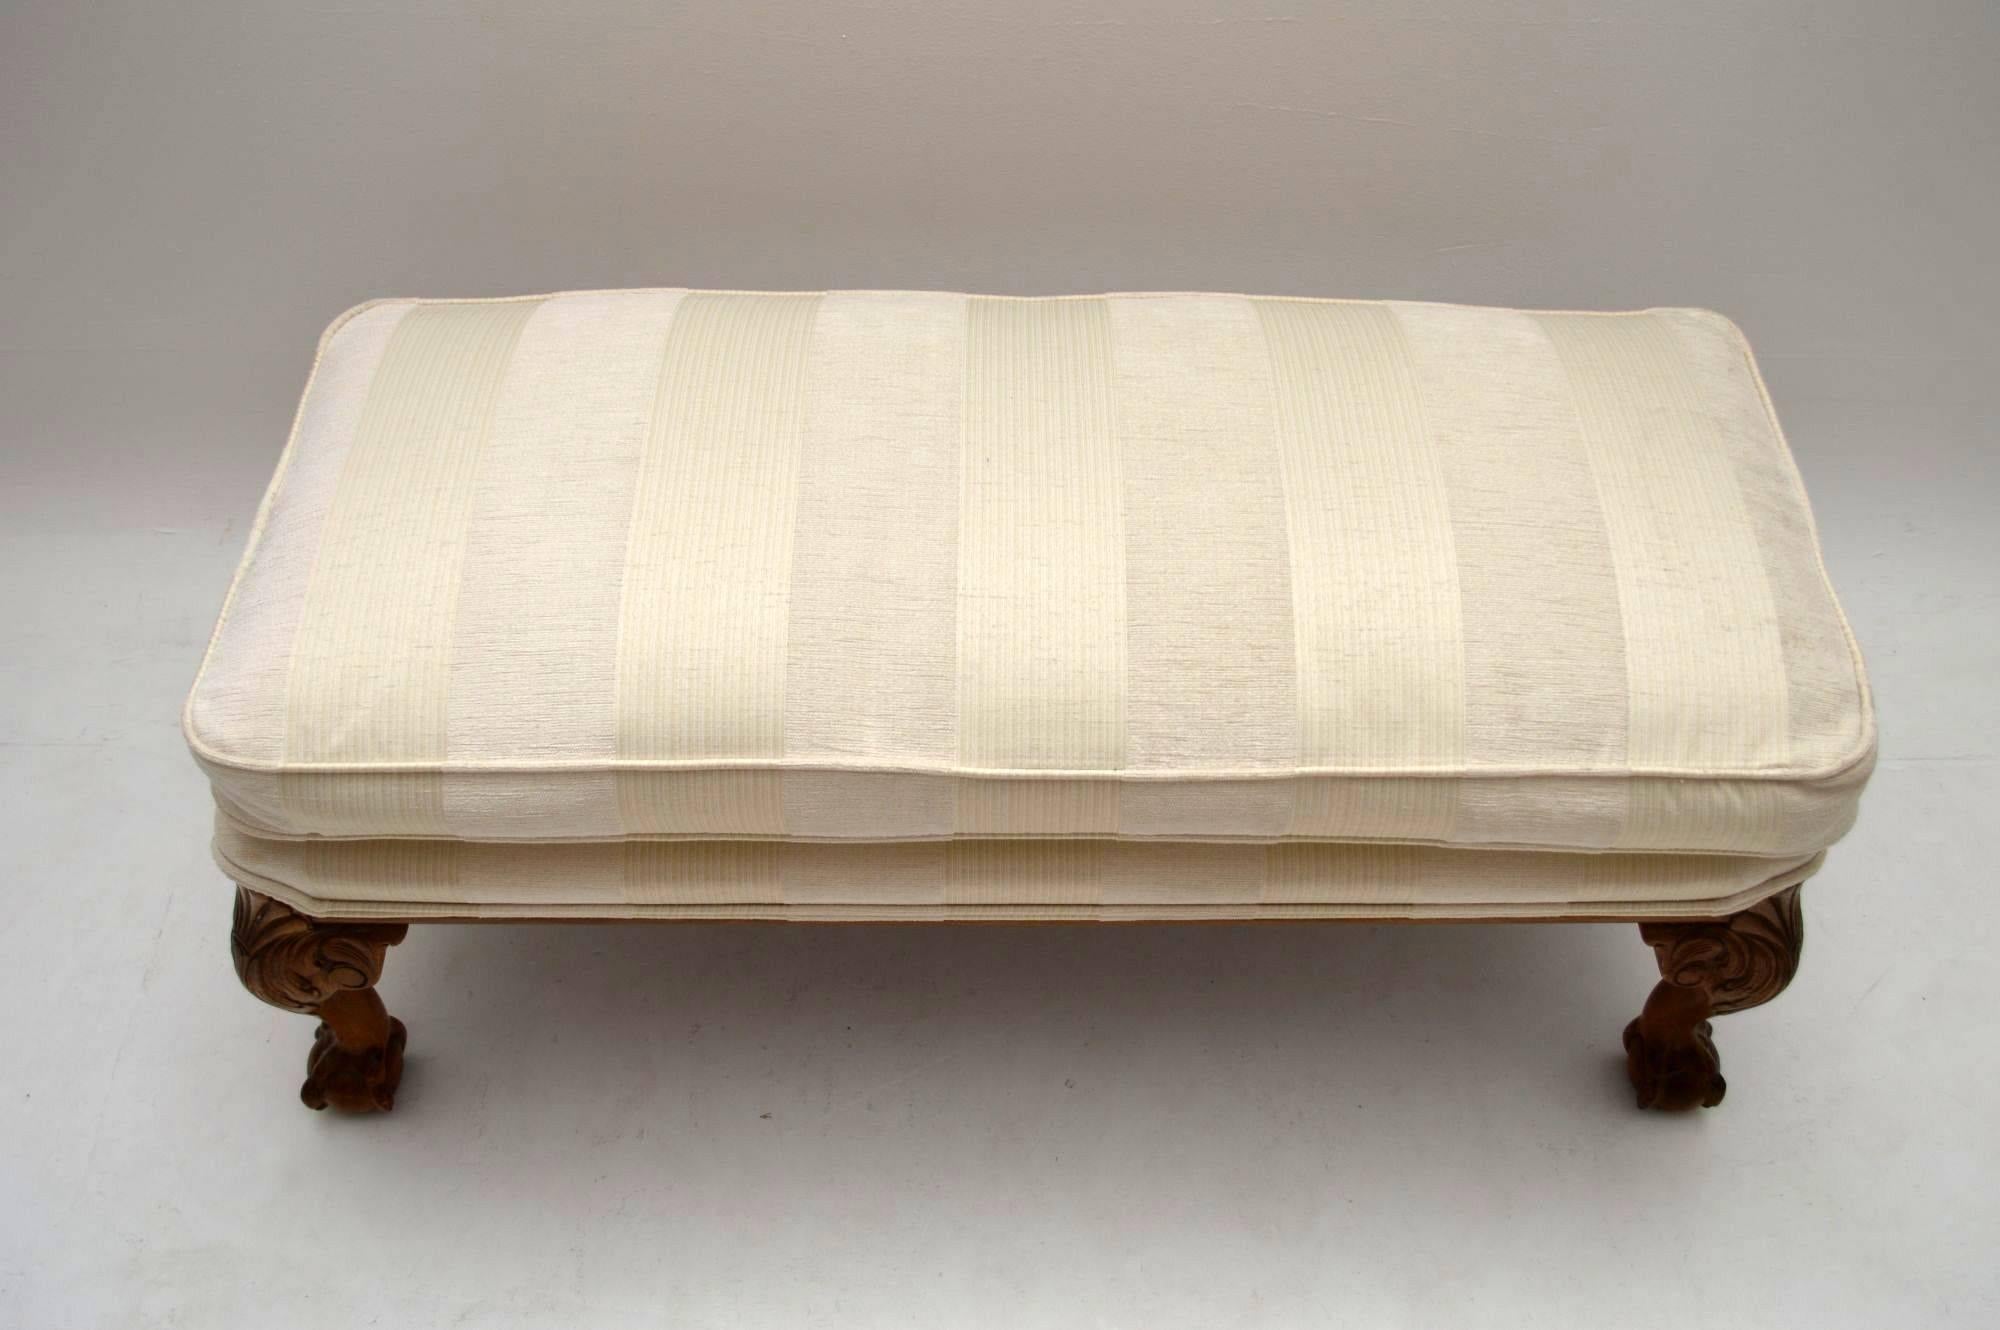 English Antique Carved Walnut Upholstered Foot Stool